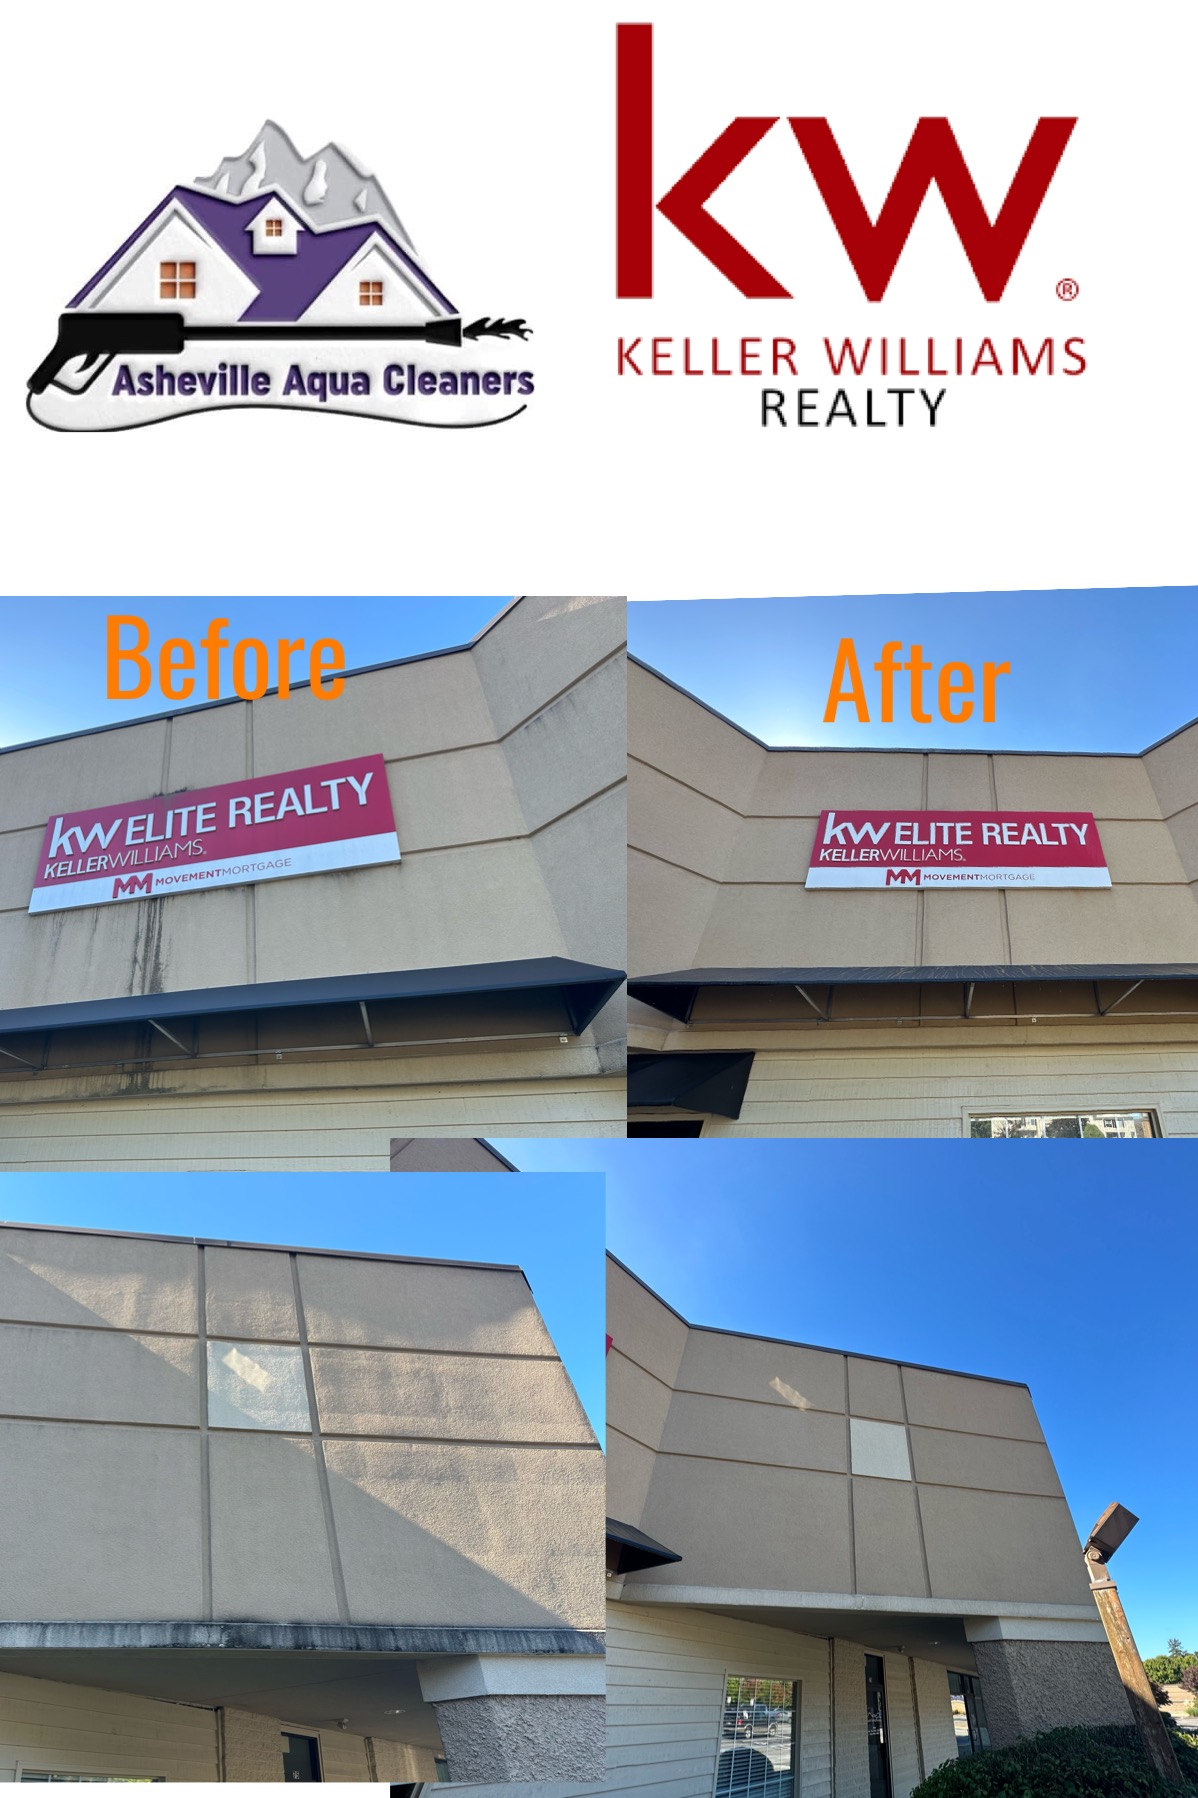 Keller Williams Commercial Pressure Washing in Asheville, NC